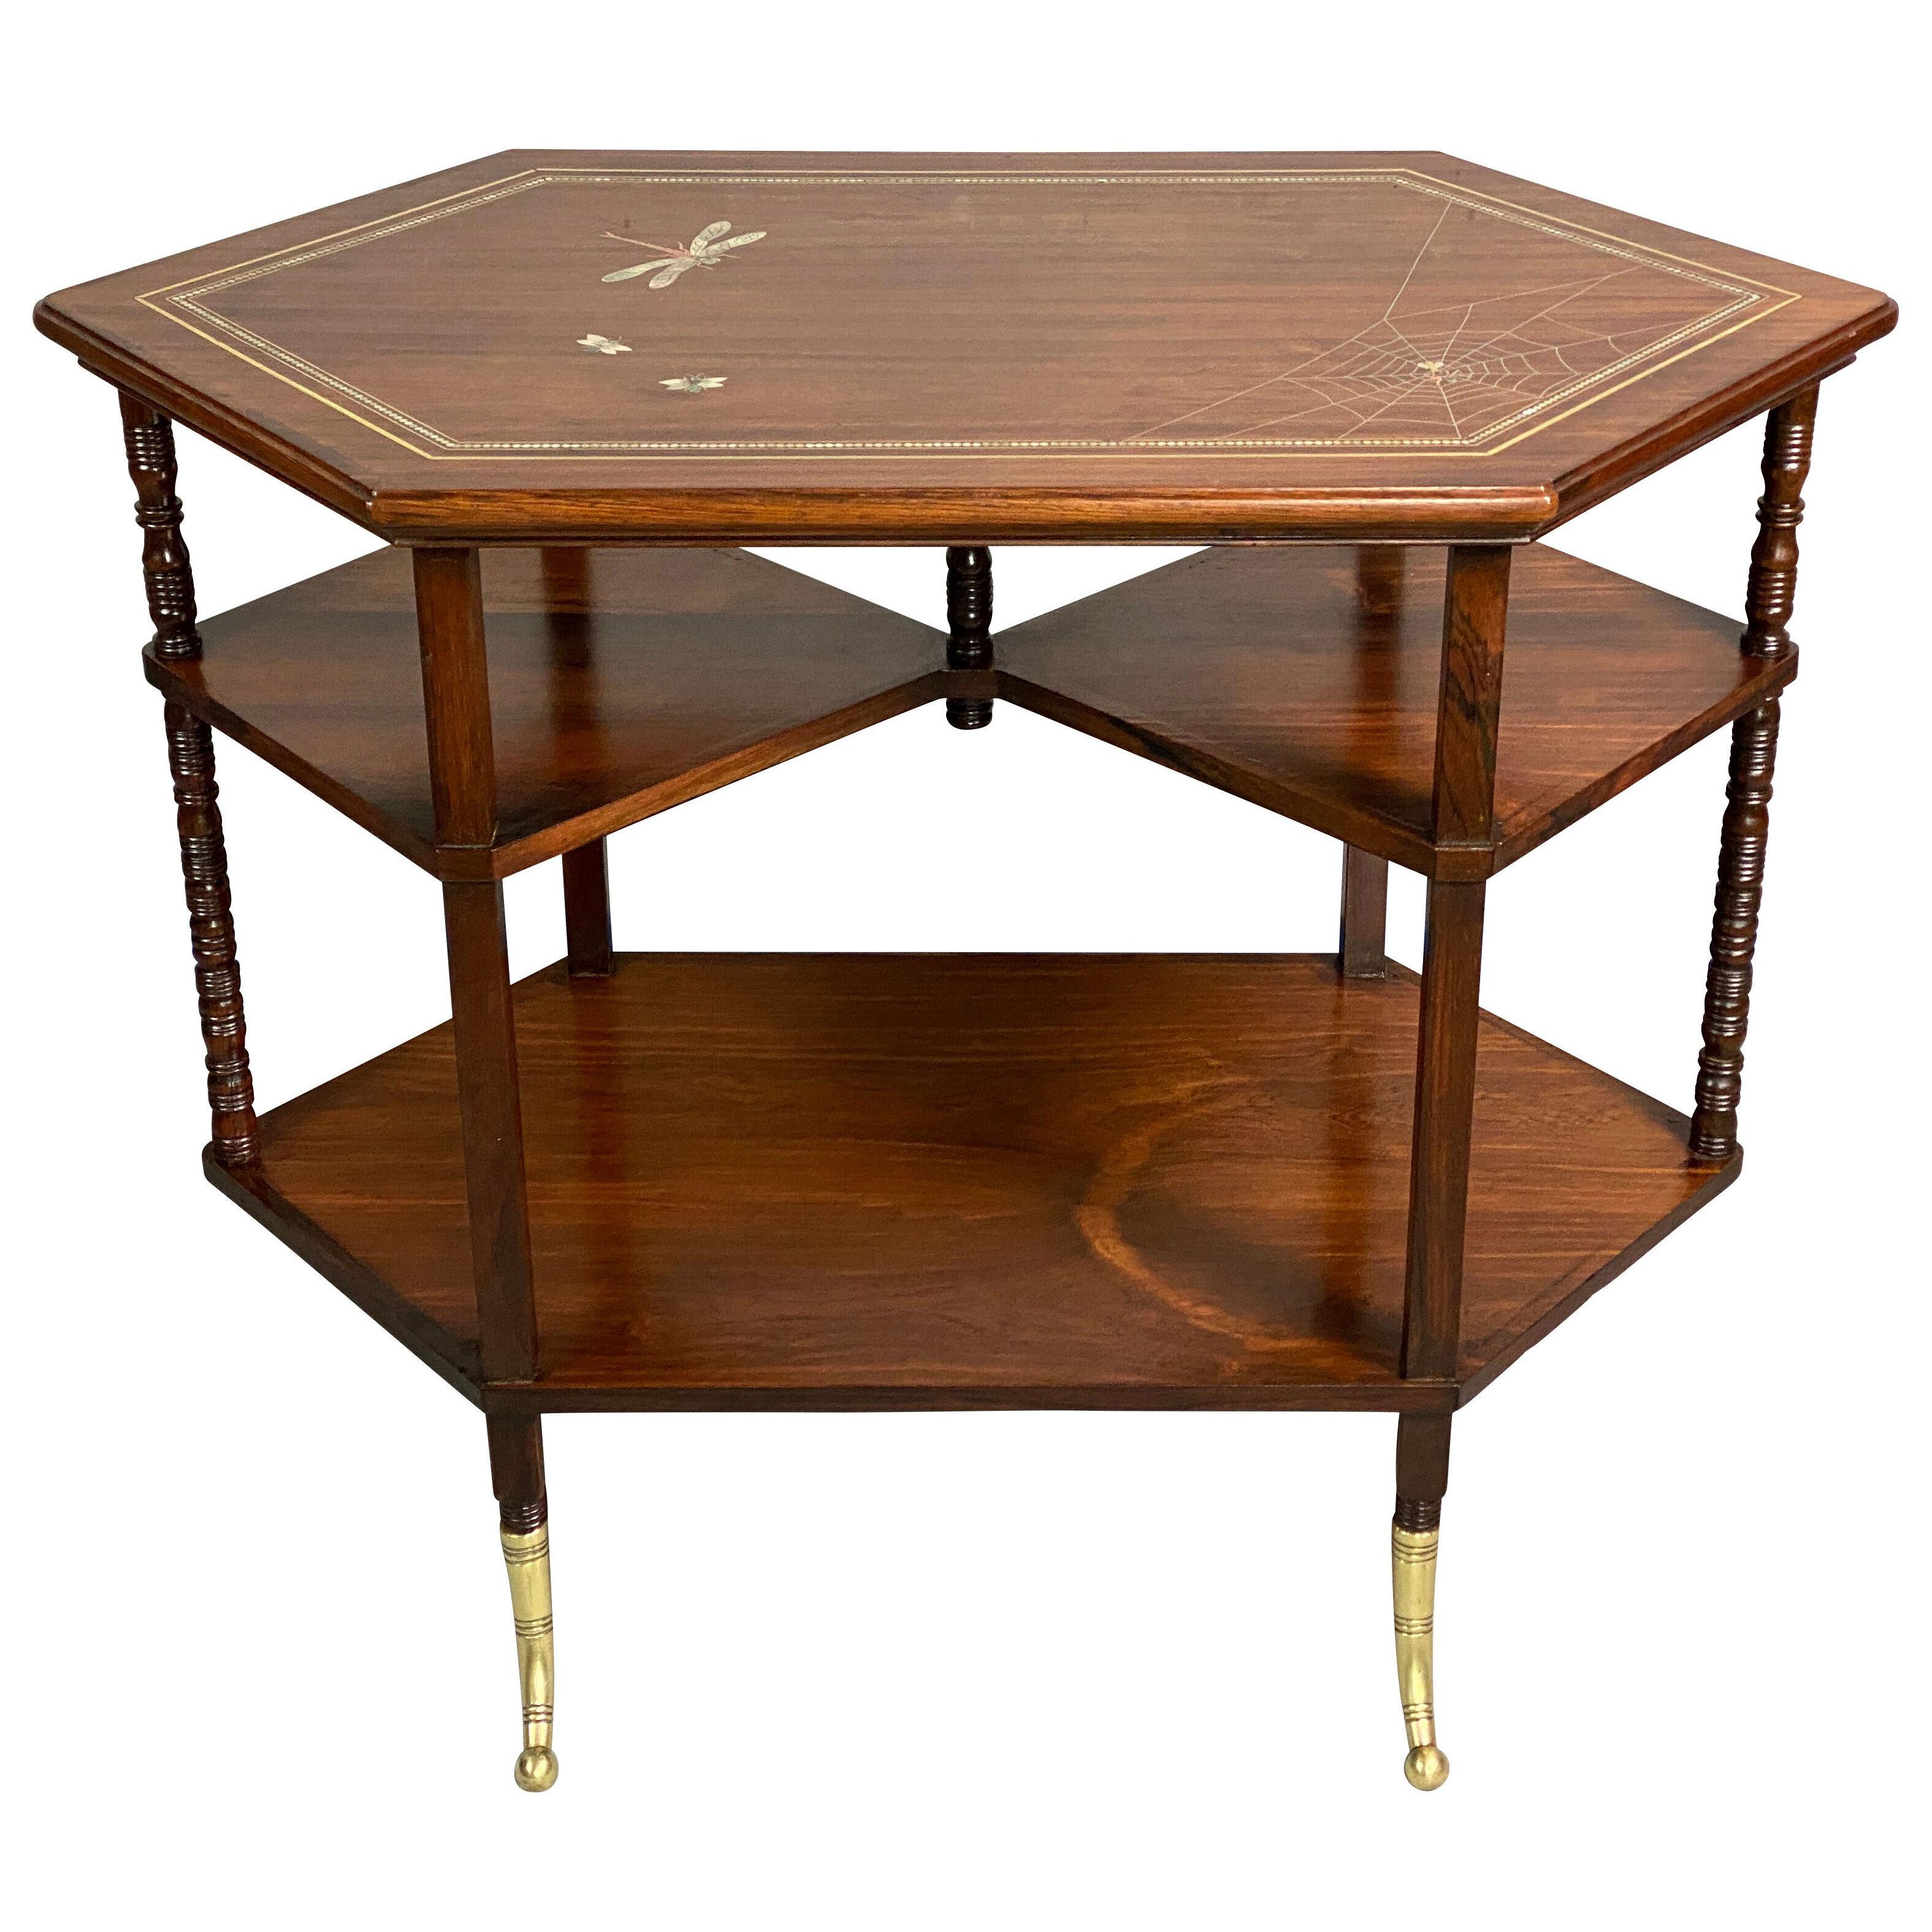 American Aesthetic Rosewood Table by A. &H. Lejambre, Philadelphia